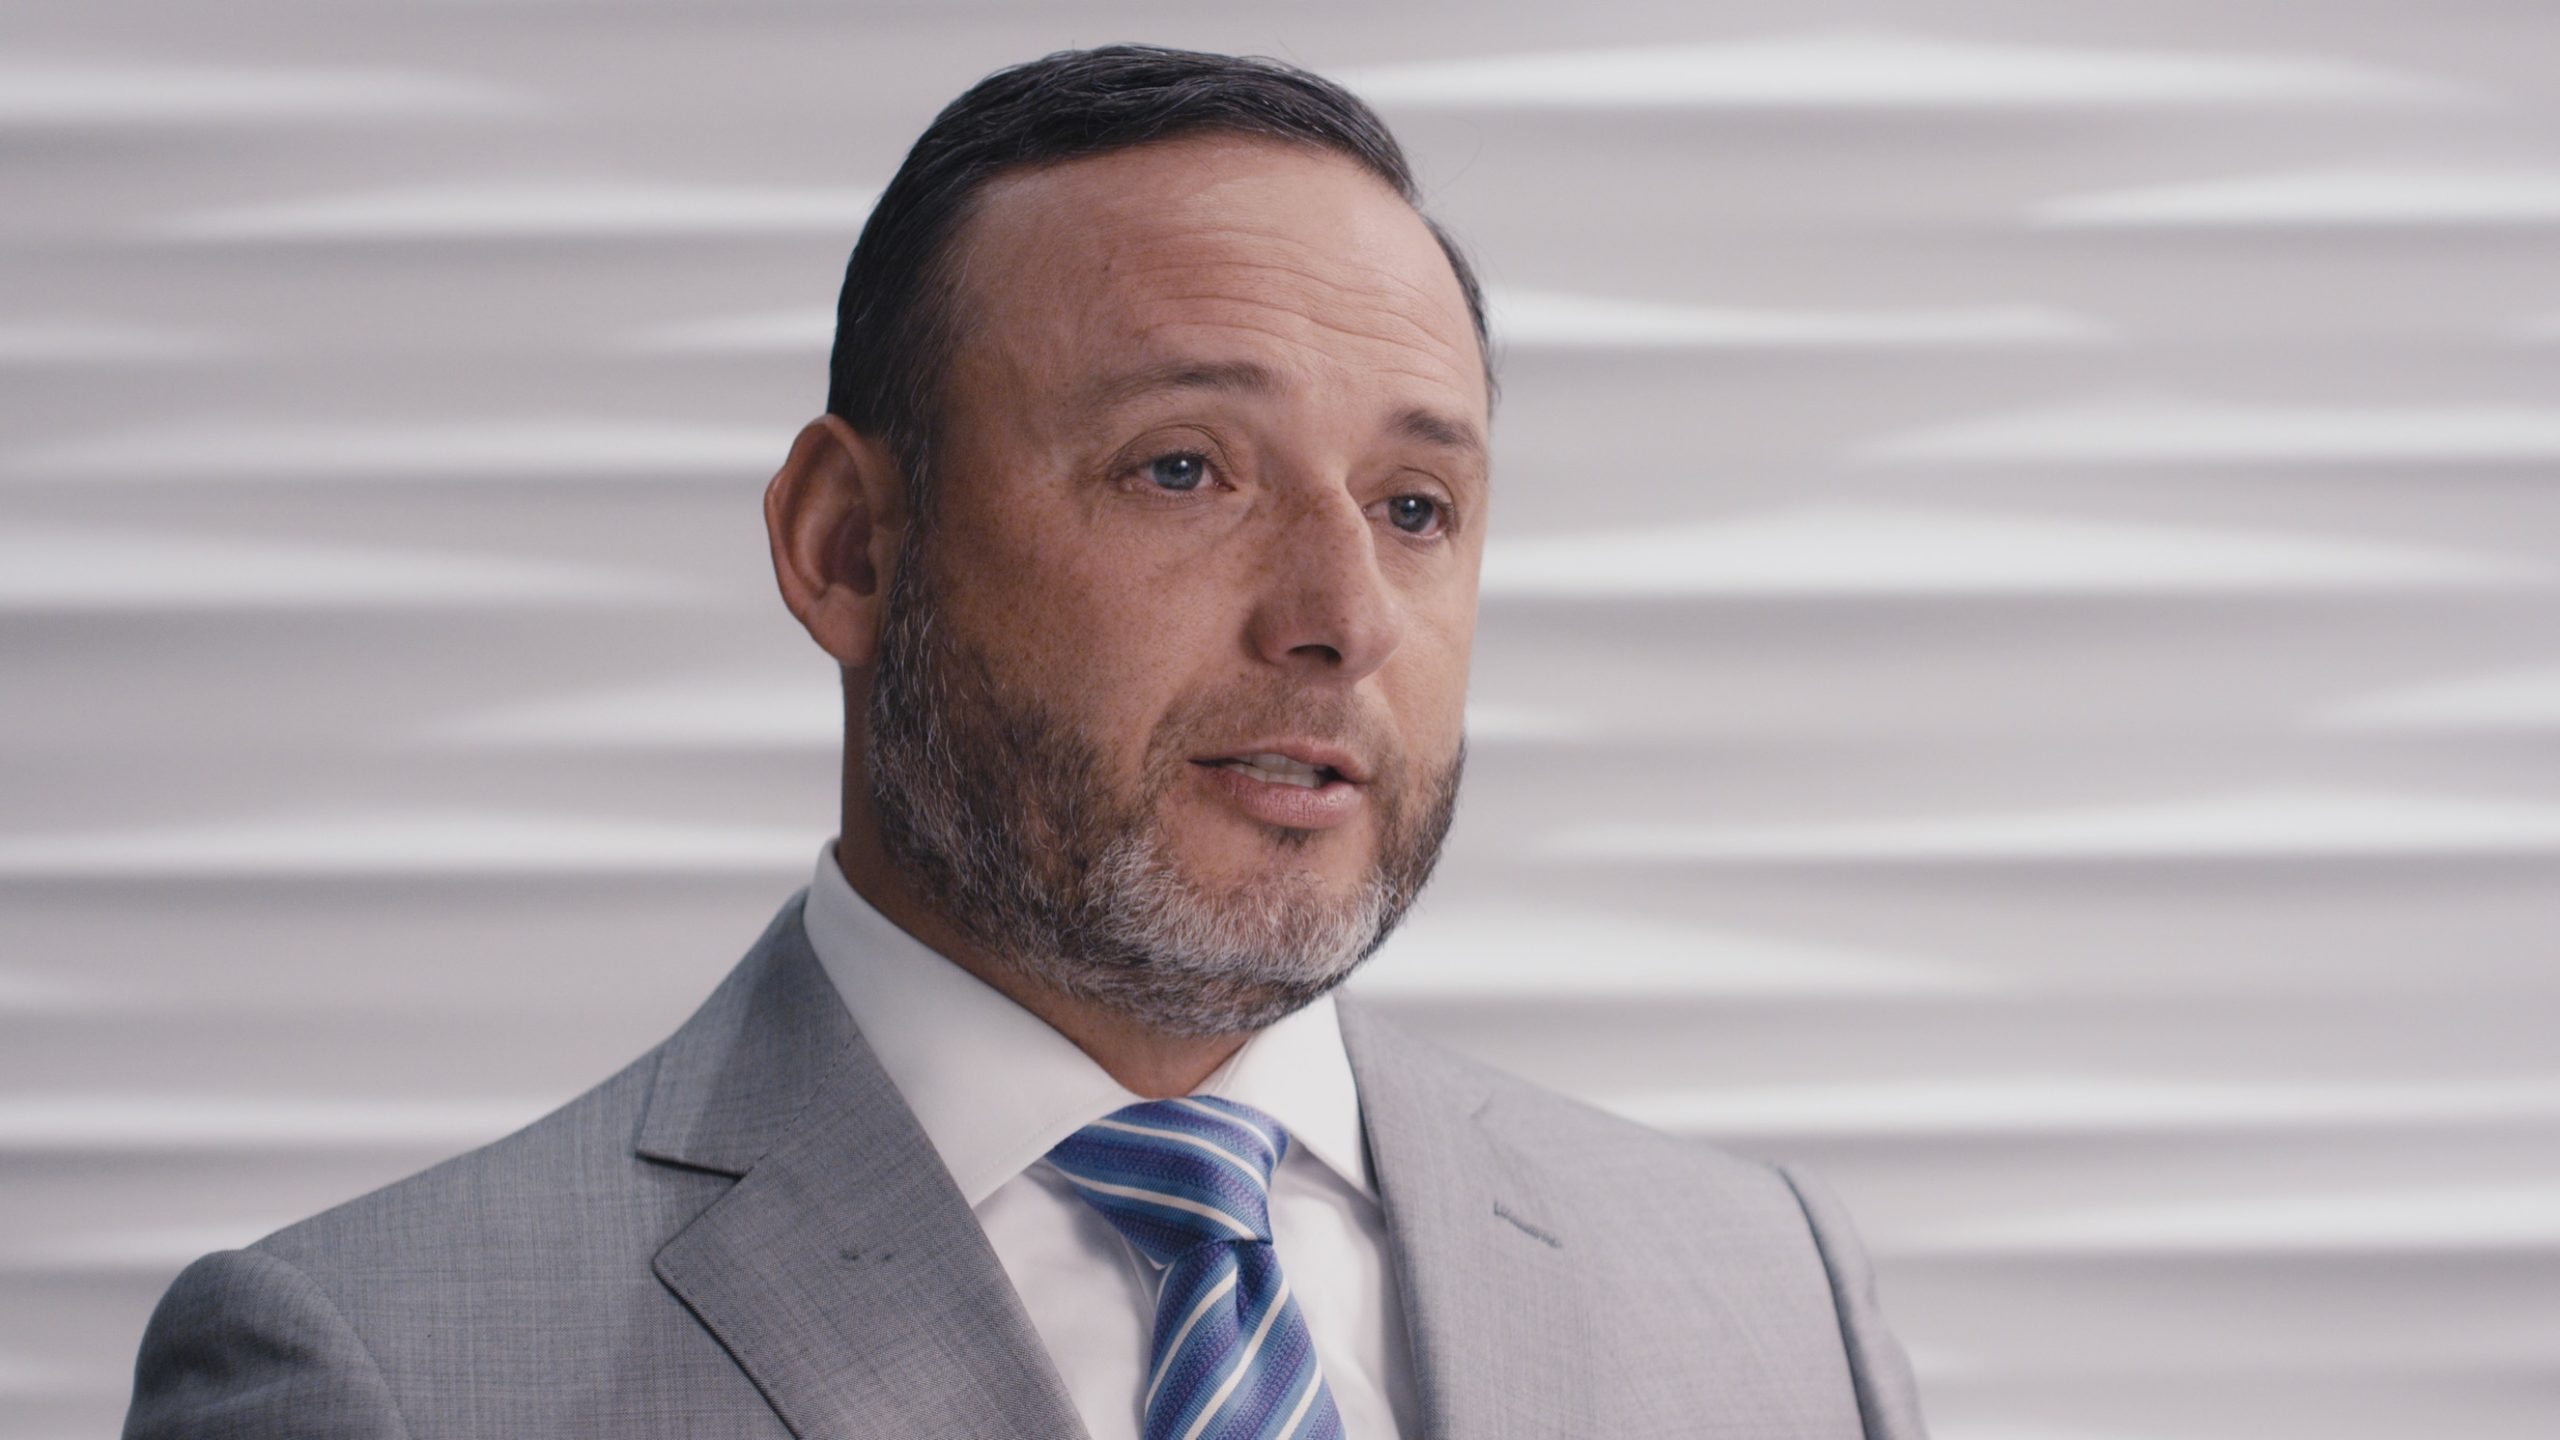 Hightower Financial Advisors Headshot of a man with a salt and paper beard wearing a gray suit with white shirt and blue tie